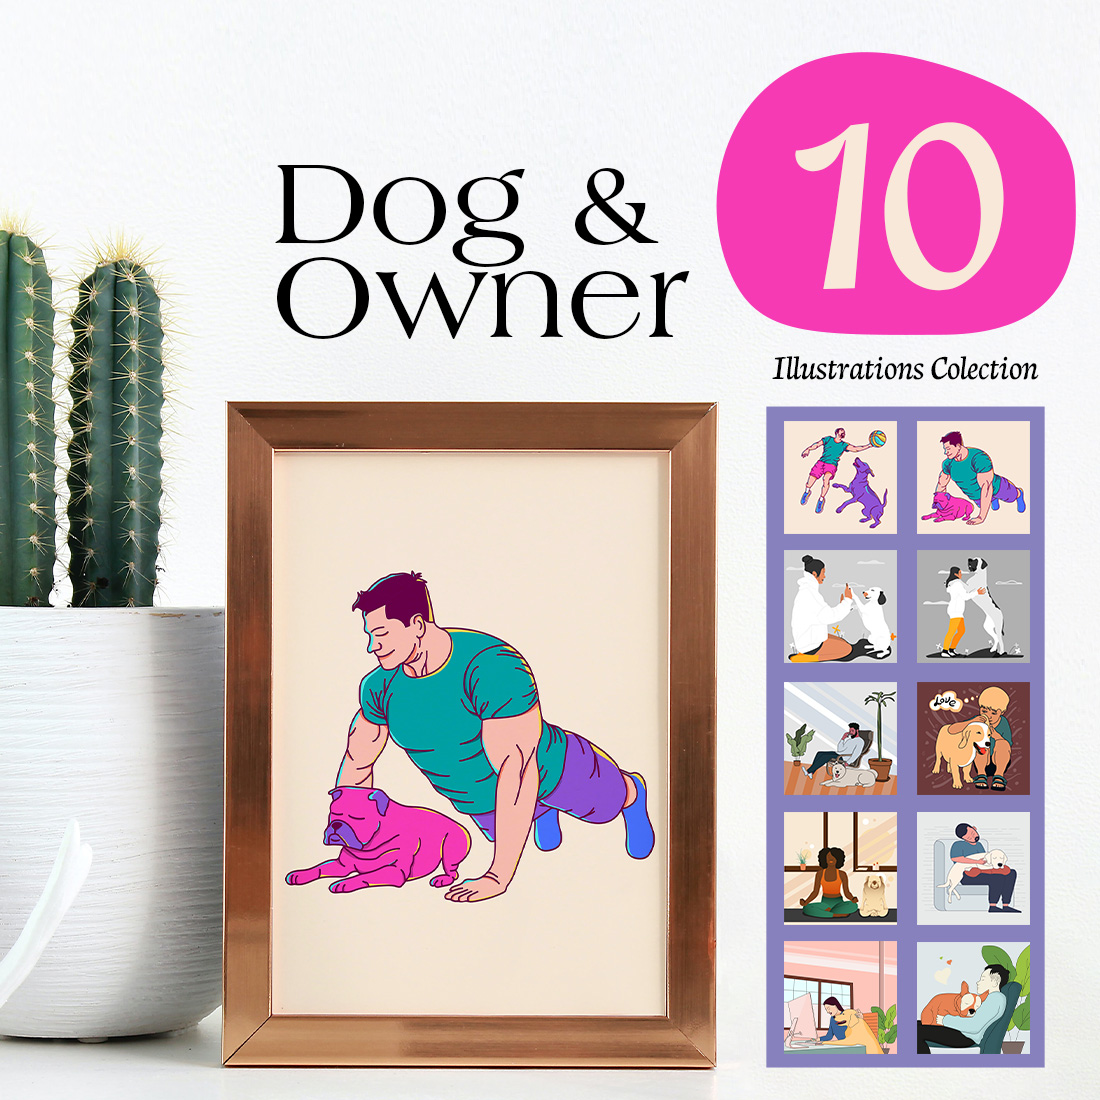 Dog & Owner illustraions collection cover image.